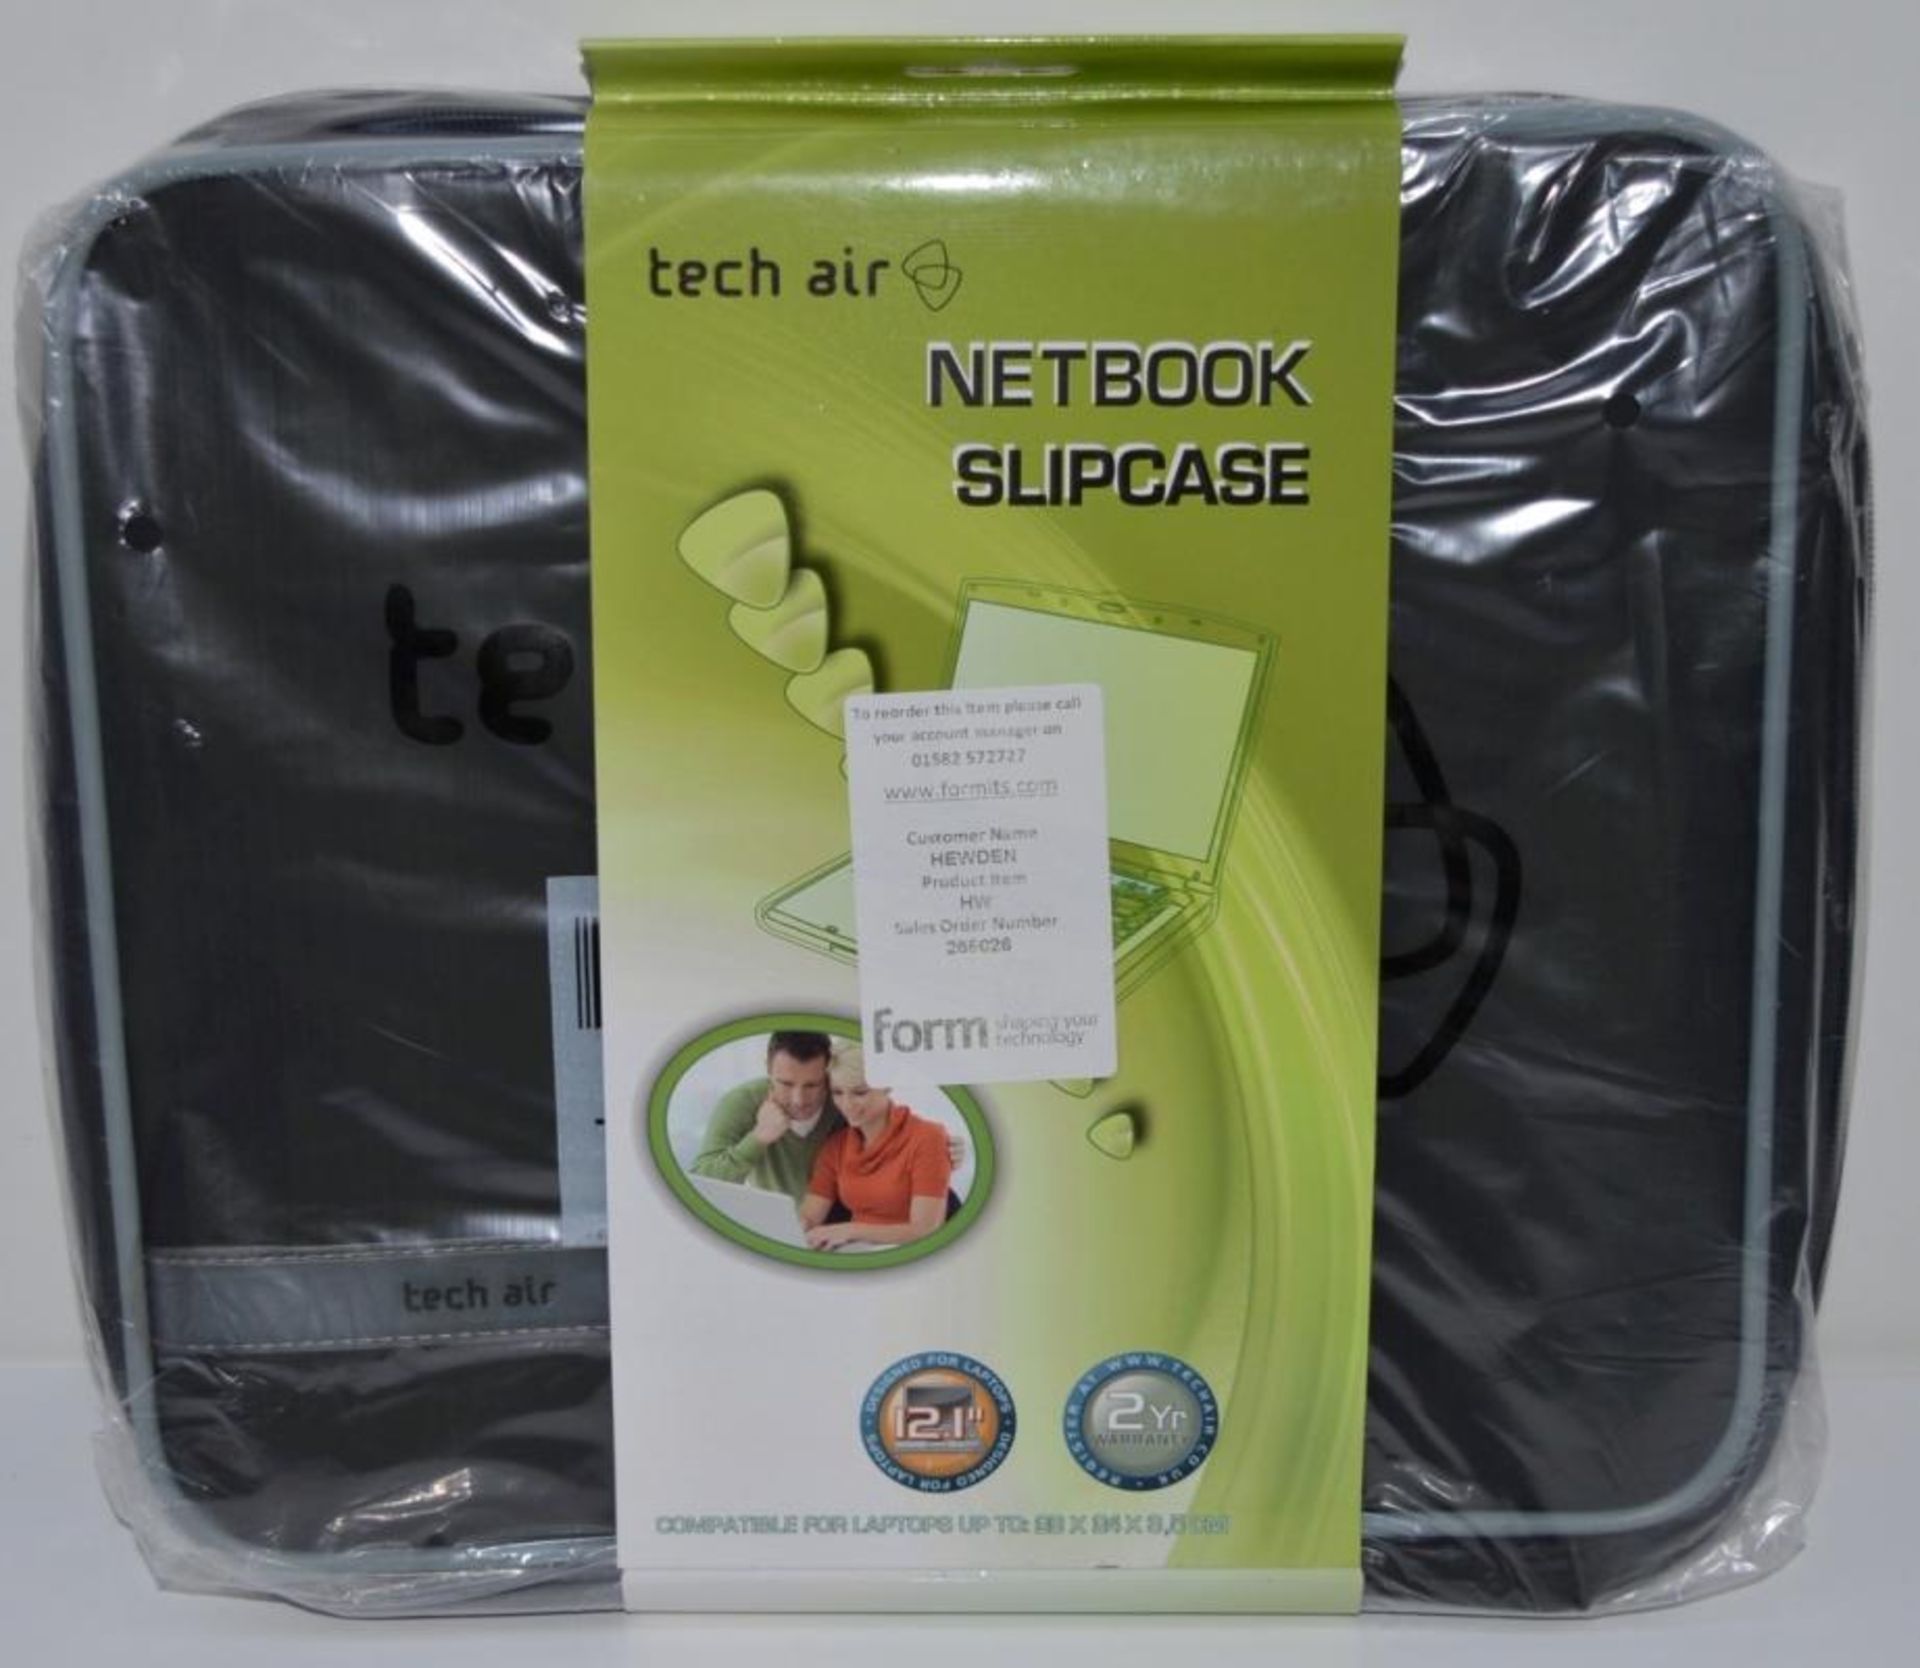 4 x Tech Air Netbook Slipcase - Suitable For Laptops upto 28 x 24 x 305cm - Brand New Stock - CL400